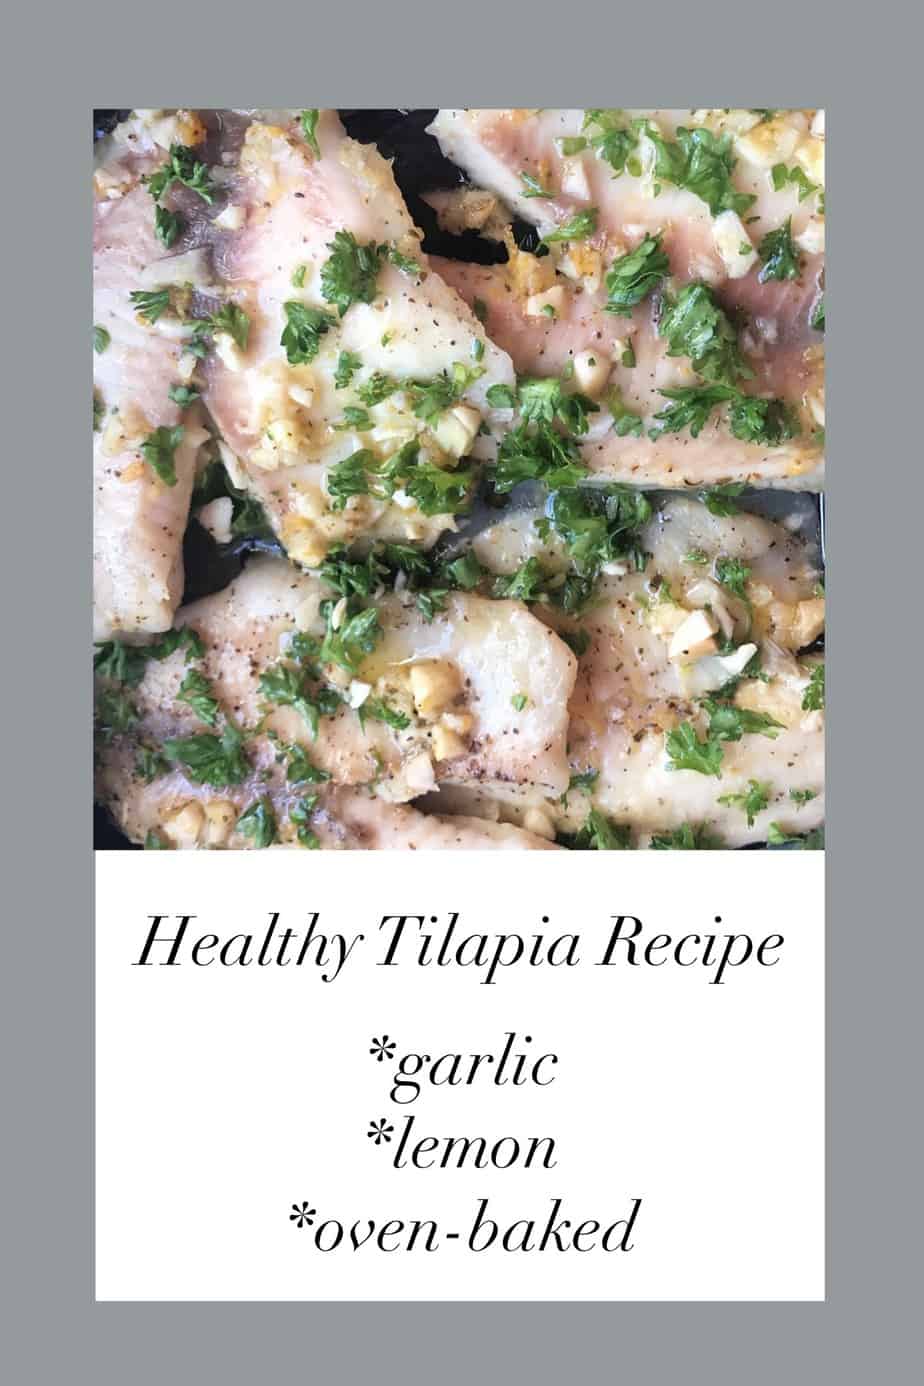 Dinner Recipes - Simple Healthy Tilapia Recipe With Garlic and Lemon